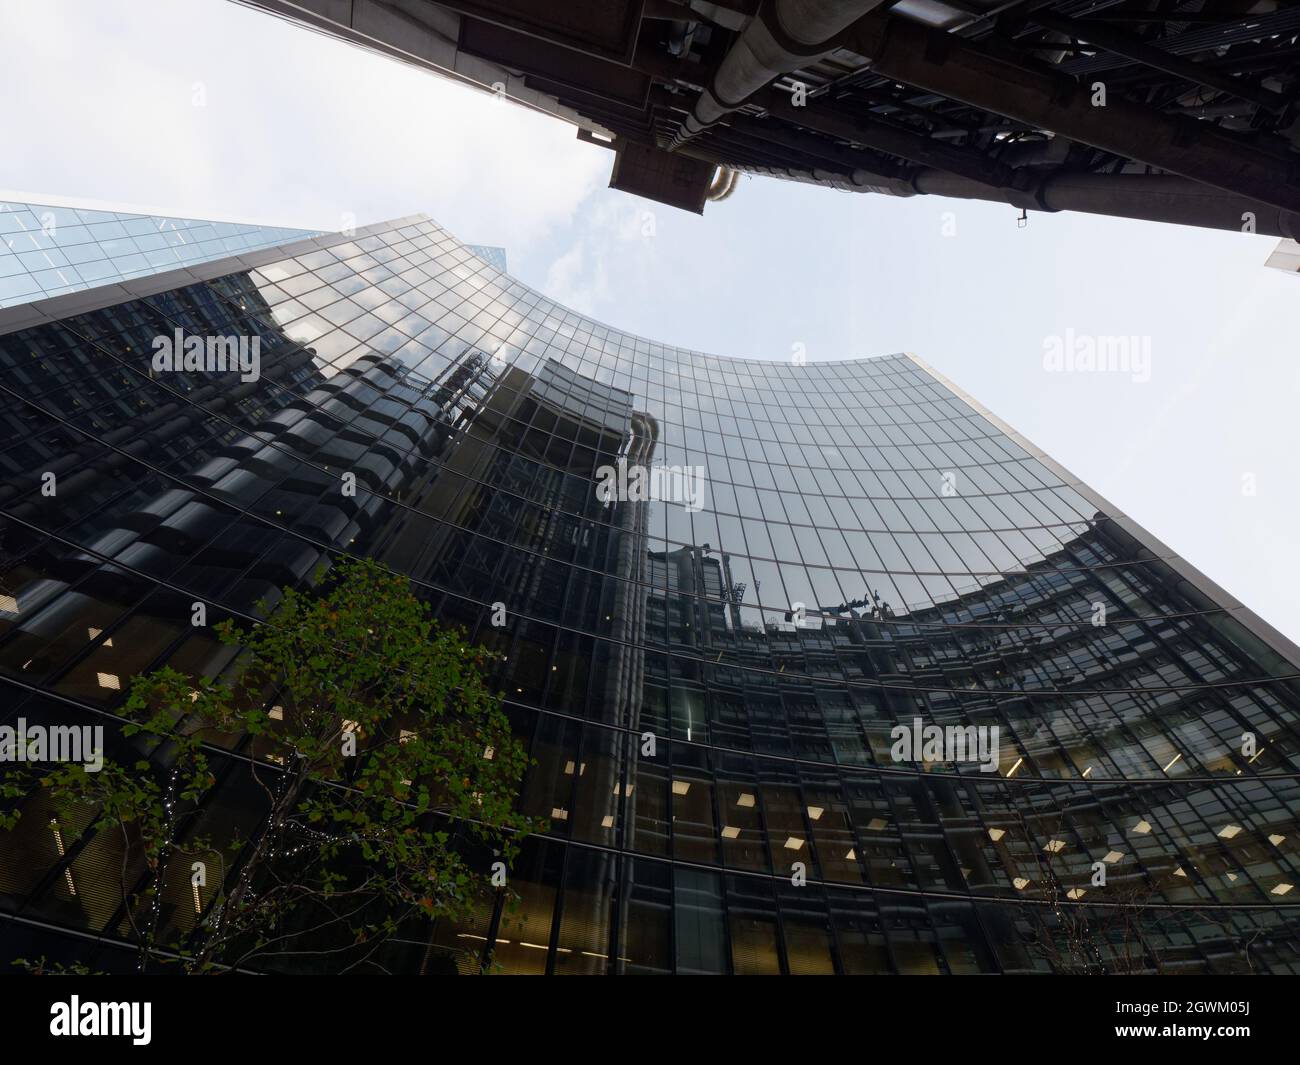 London, Greater London, England, September 21 2021: Modern buildings in the City of London on Lime Street. Stock Photo